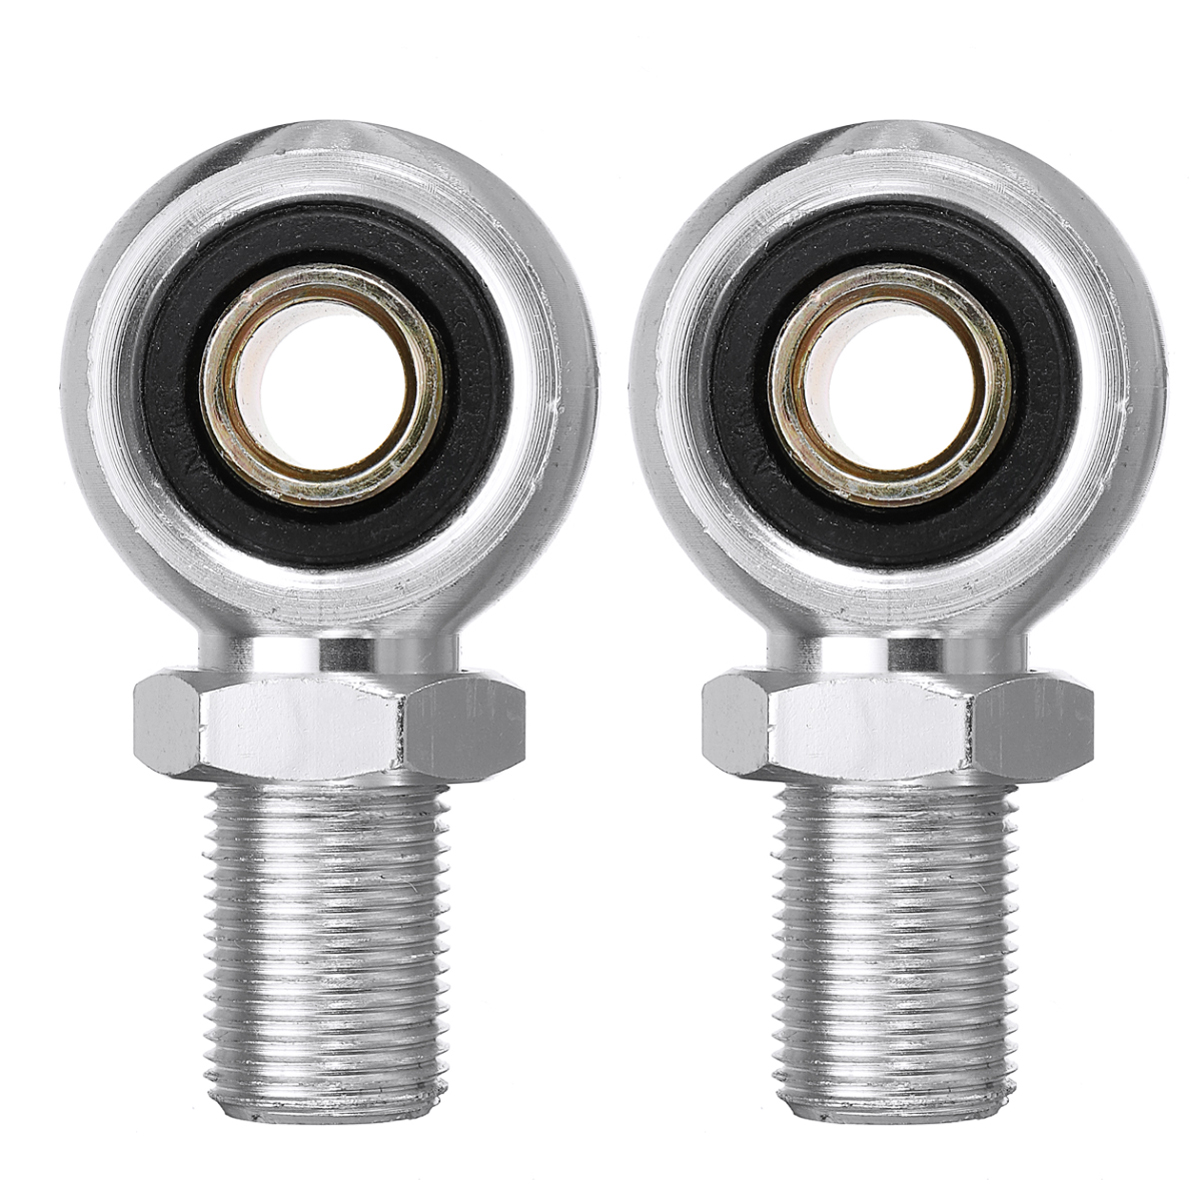 

Eye Adapter End For 280mm 320mm 380mm 400mm Shock Absorber Motorcycle Scooter